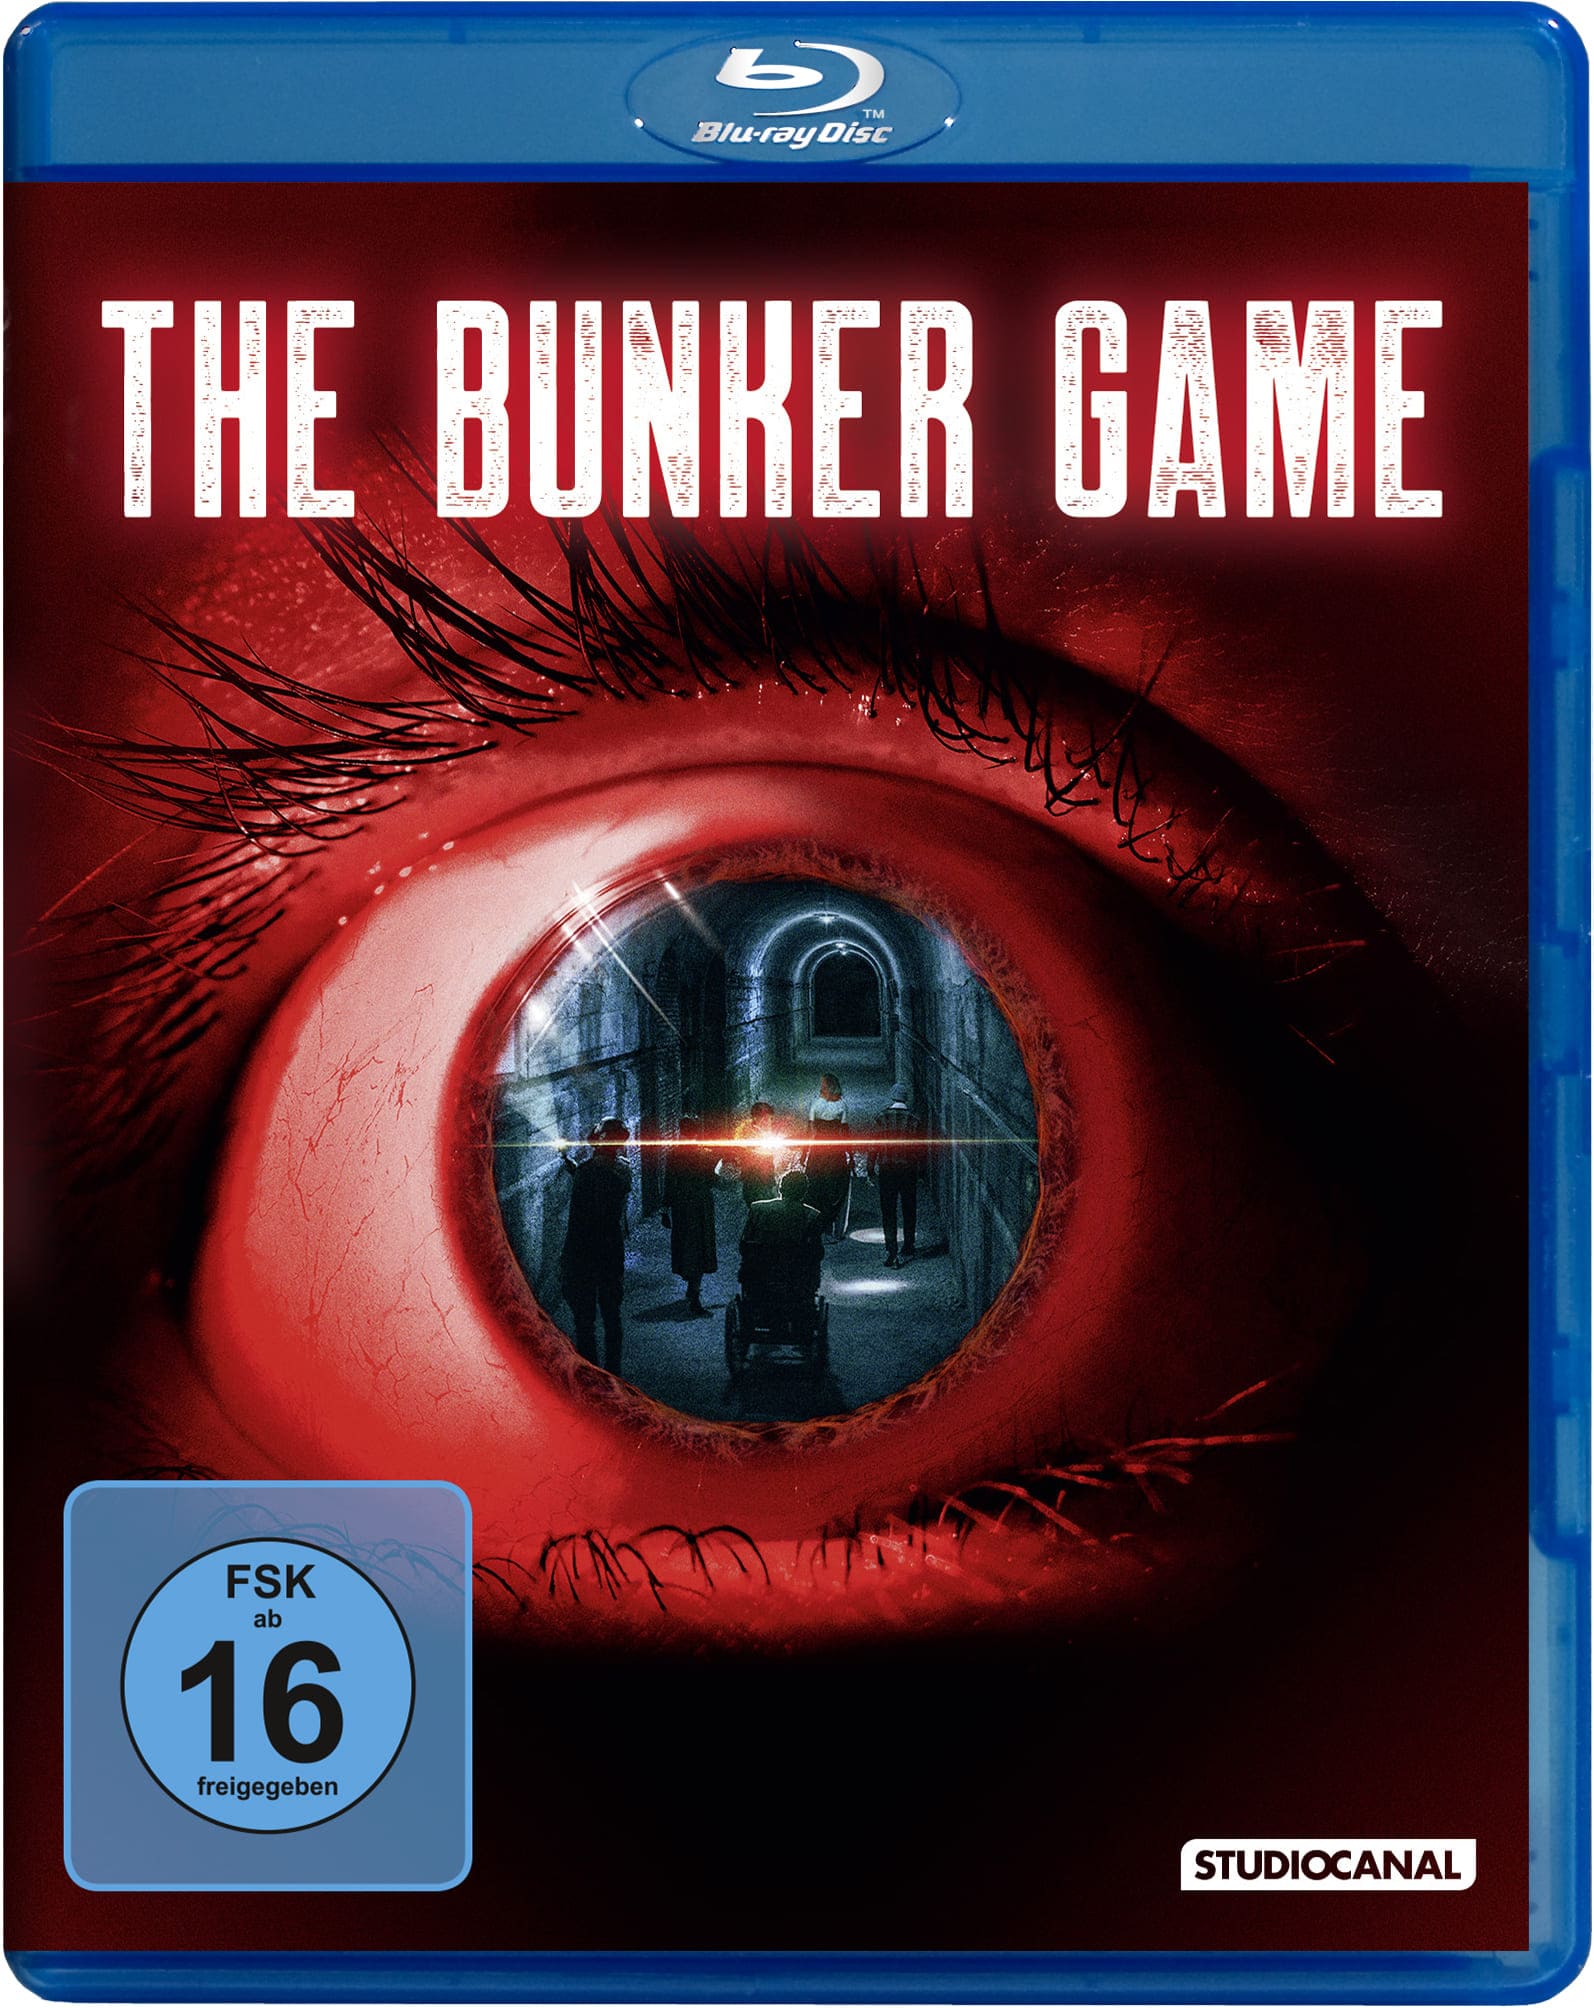 The Bunker Game (Blu-ray)